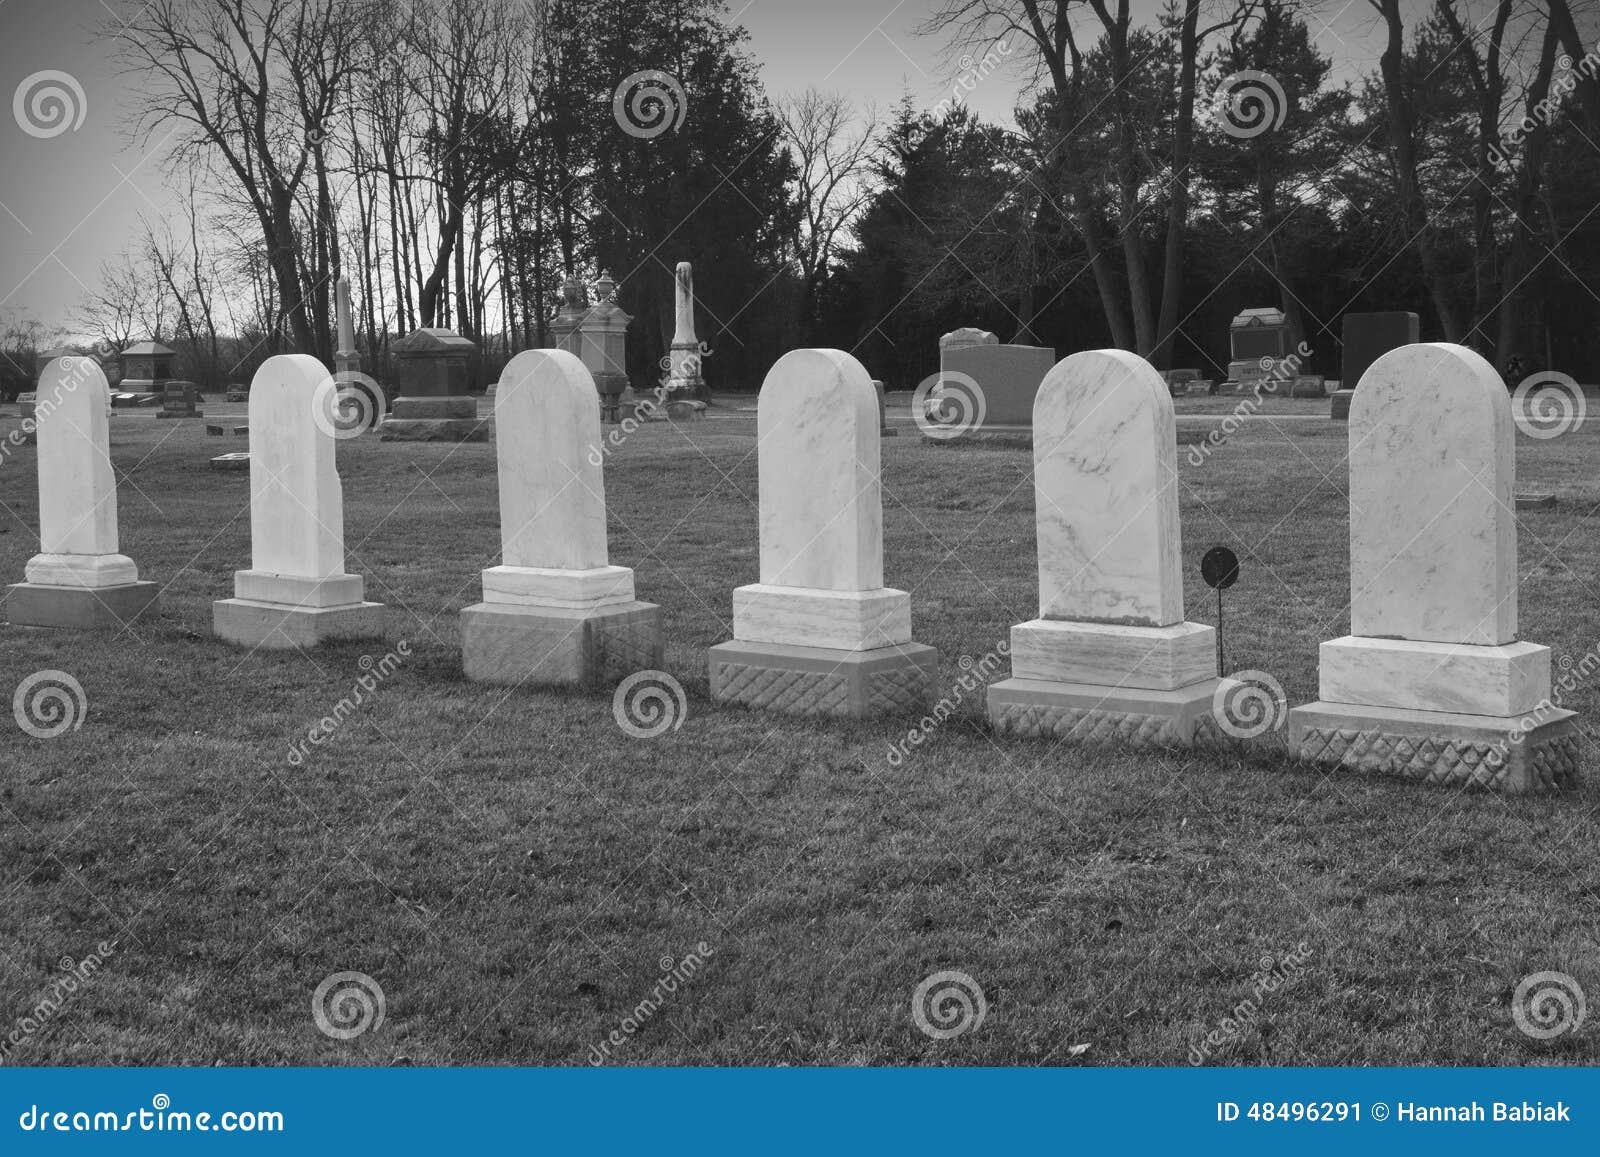 six matching tombstones in cemetary